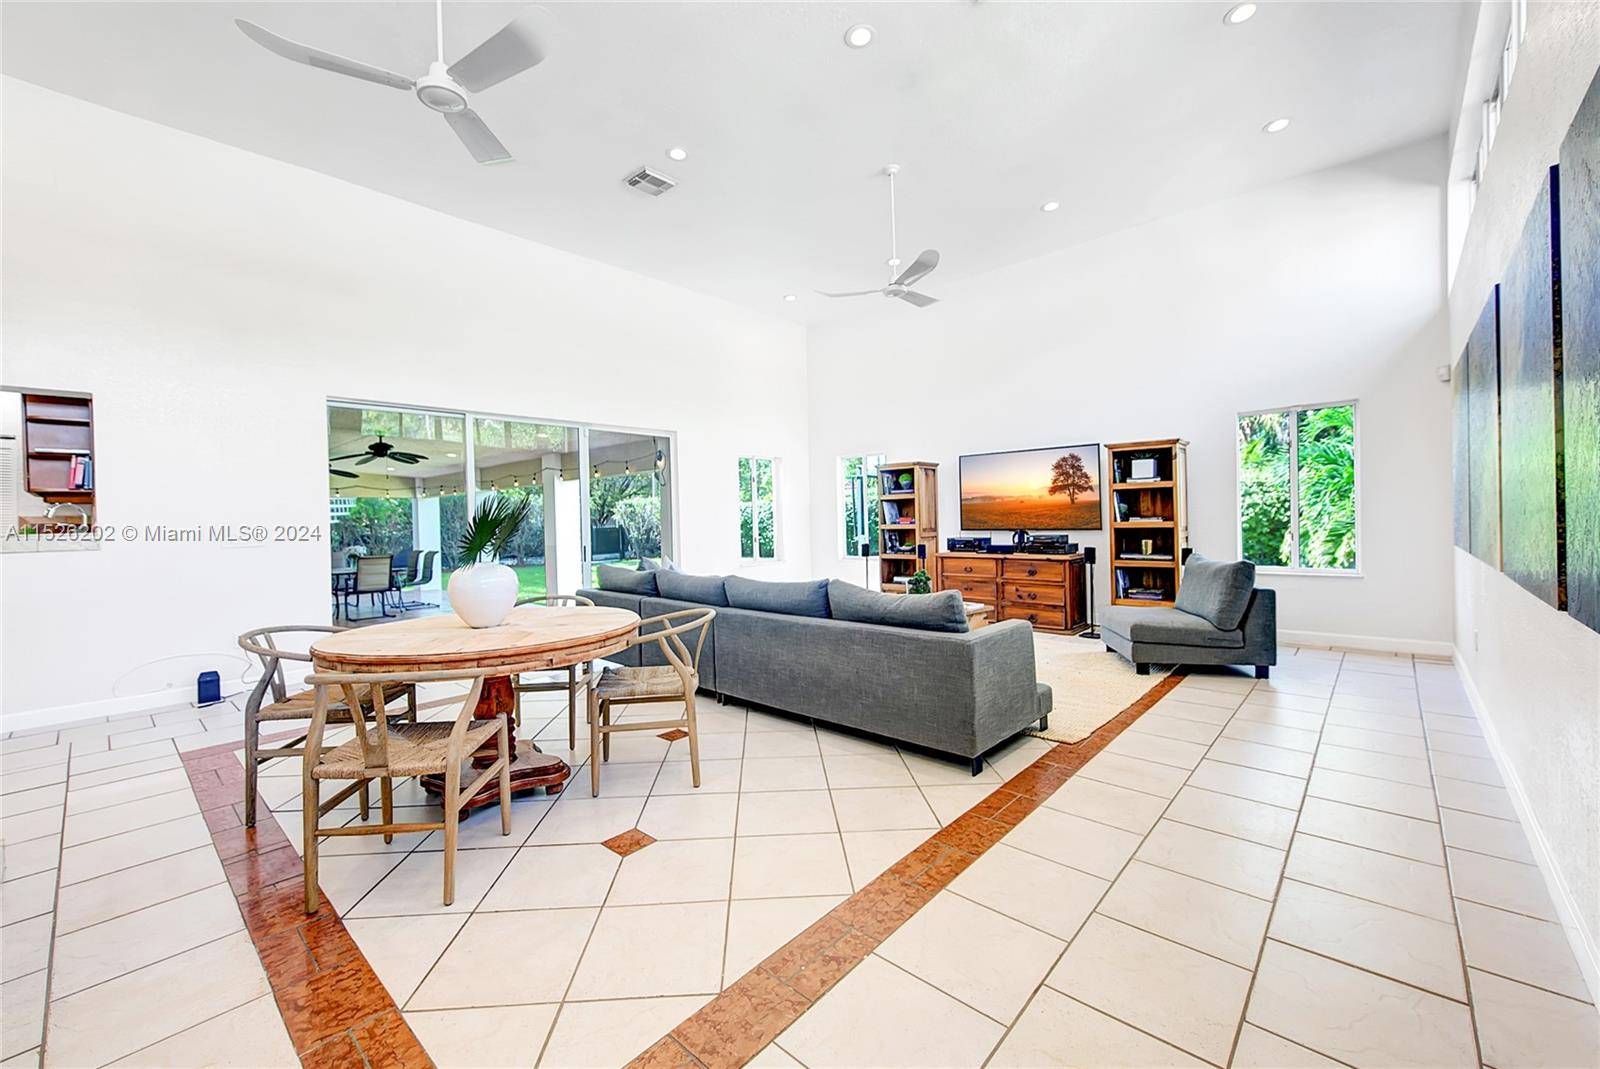 Raise your family in a spacious, fabulous Spanish Colonial 5, 200 sqft gated Brickell Hammock home 2 blks from the ocean at the entrance to Brickell, Key Biscayne Coco Grove.